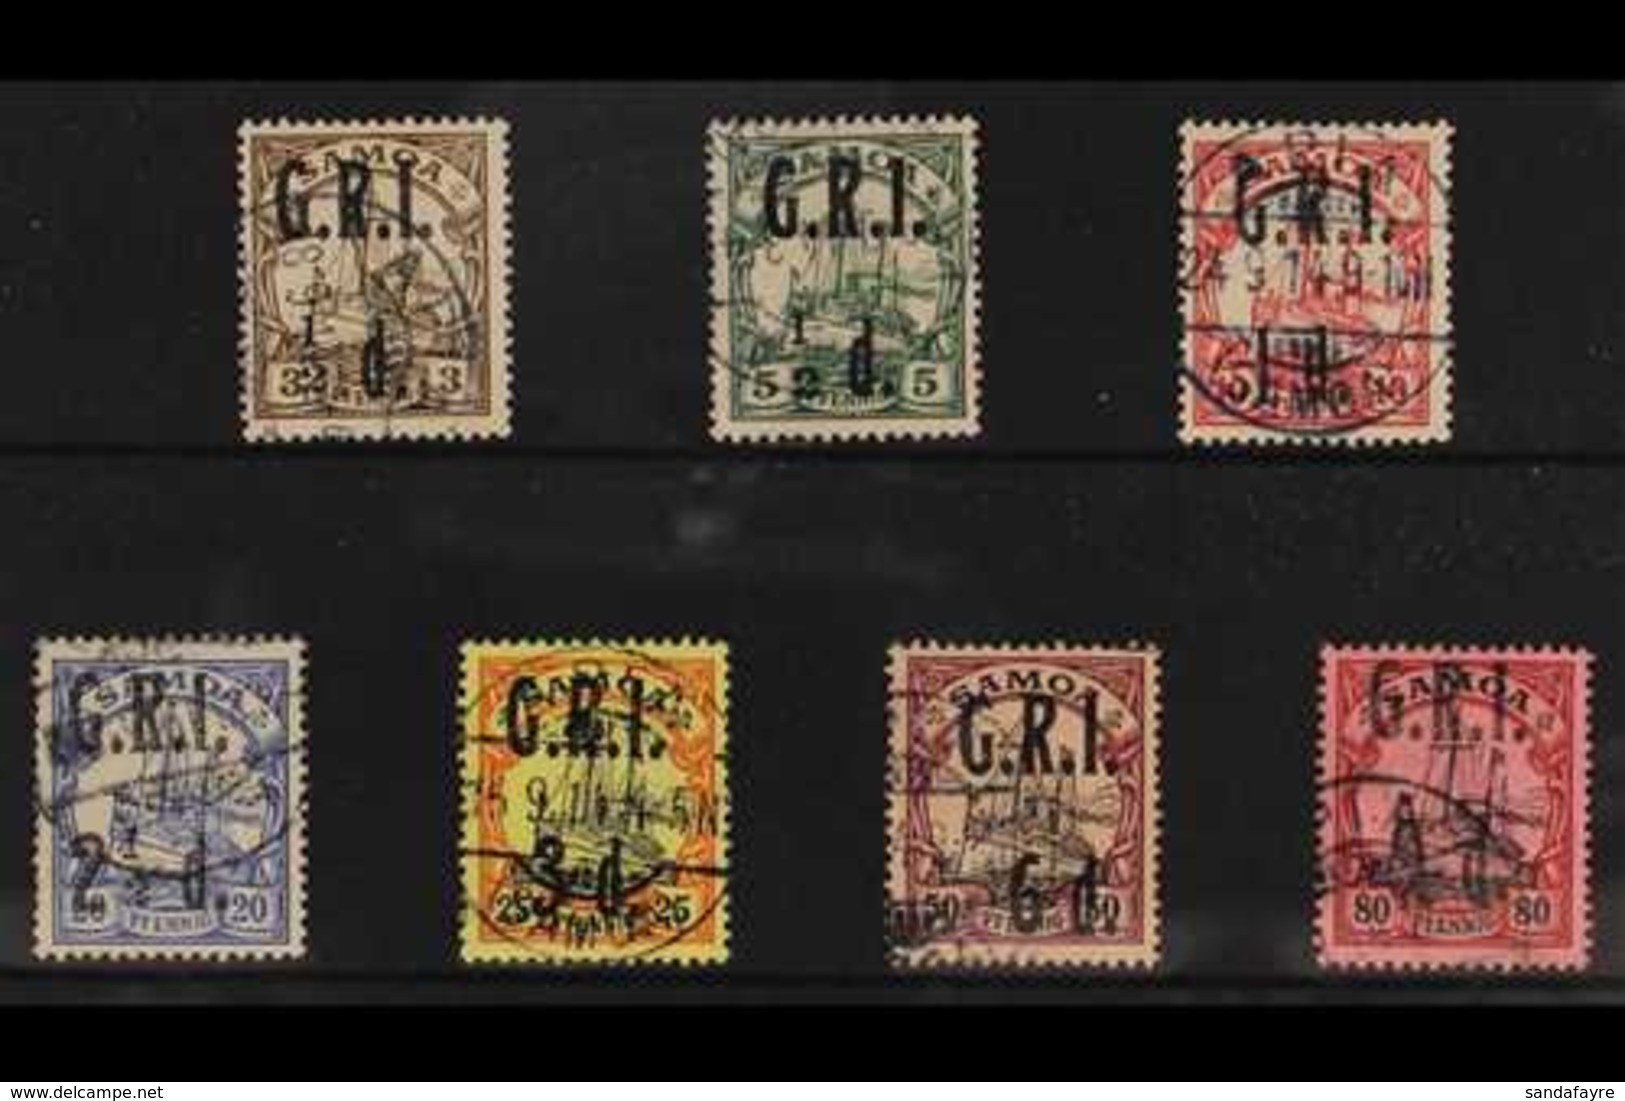 1914 NEW ZEALAND OCCUPATION  A Fine Used Group Of The Surcharged "Kaiser Yacht" Issues That Includes ½d On 3pf Brown, ½d - Samoa